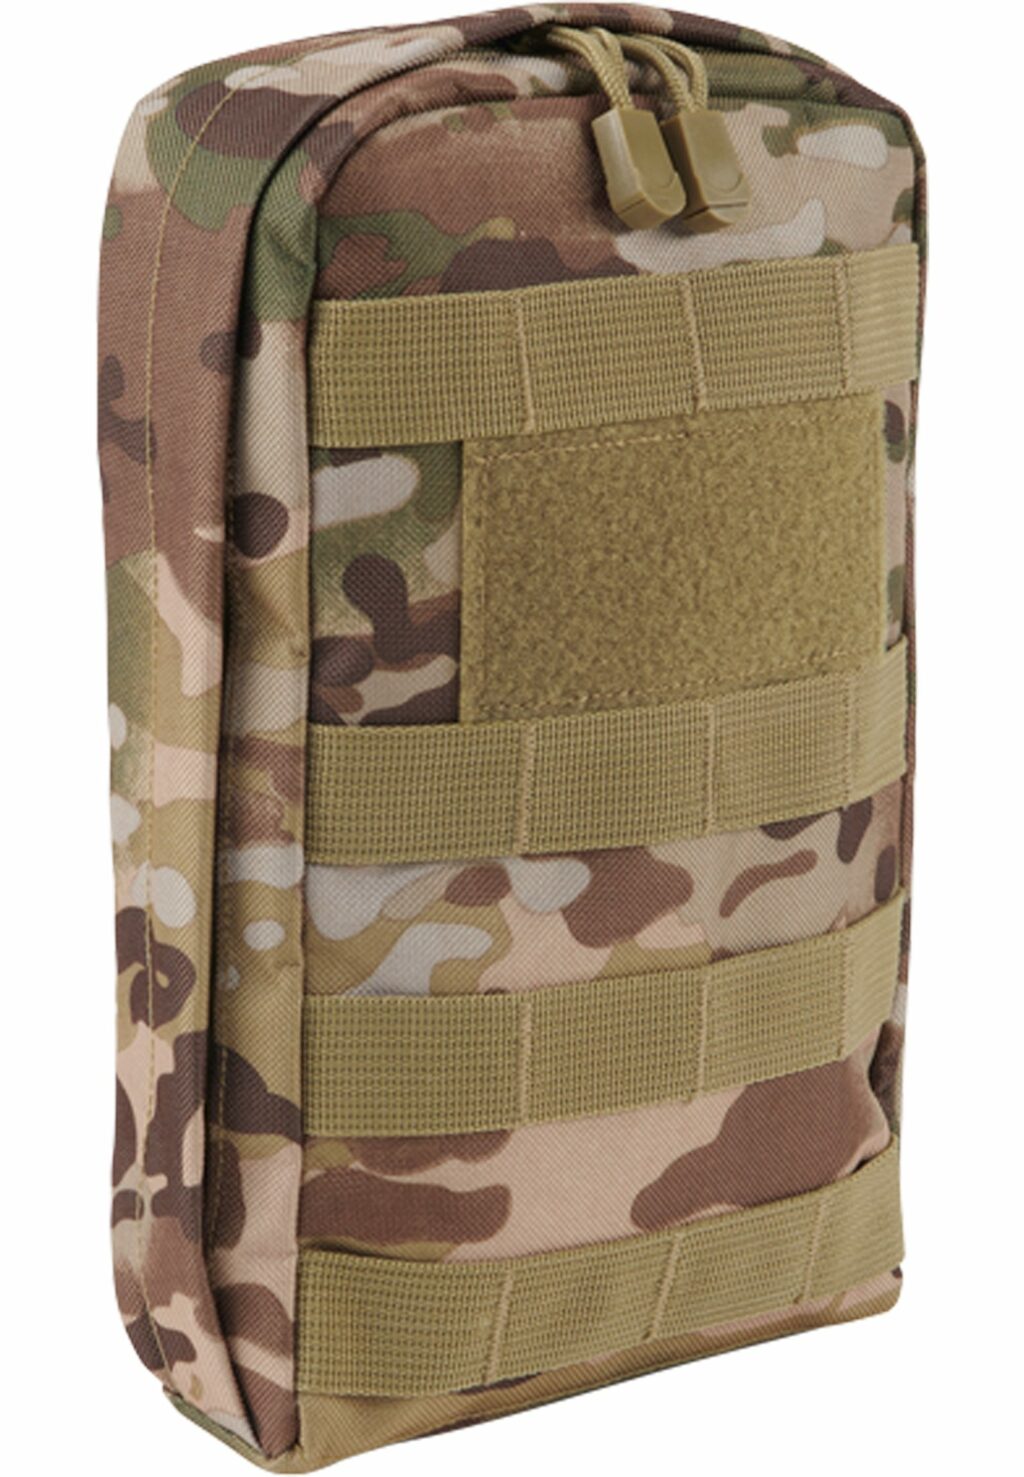 Brandit Snake Molle Pouch tactical camo  one BD8044